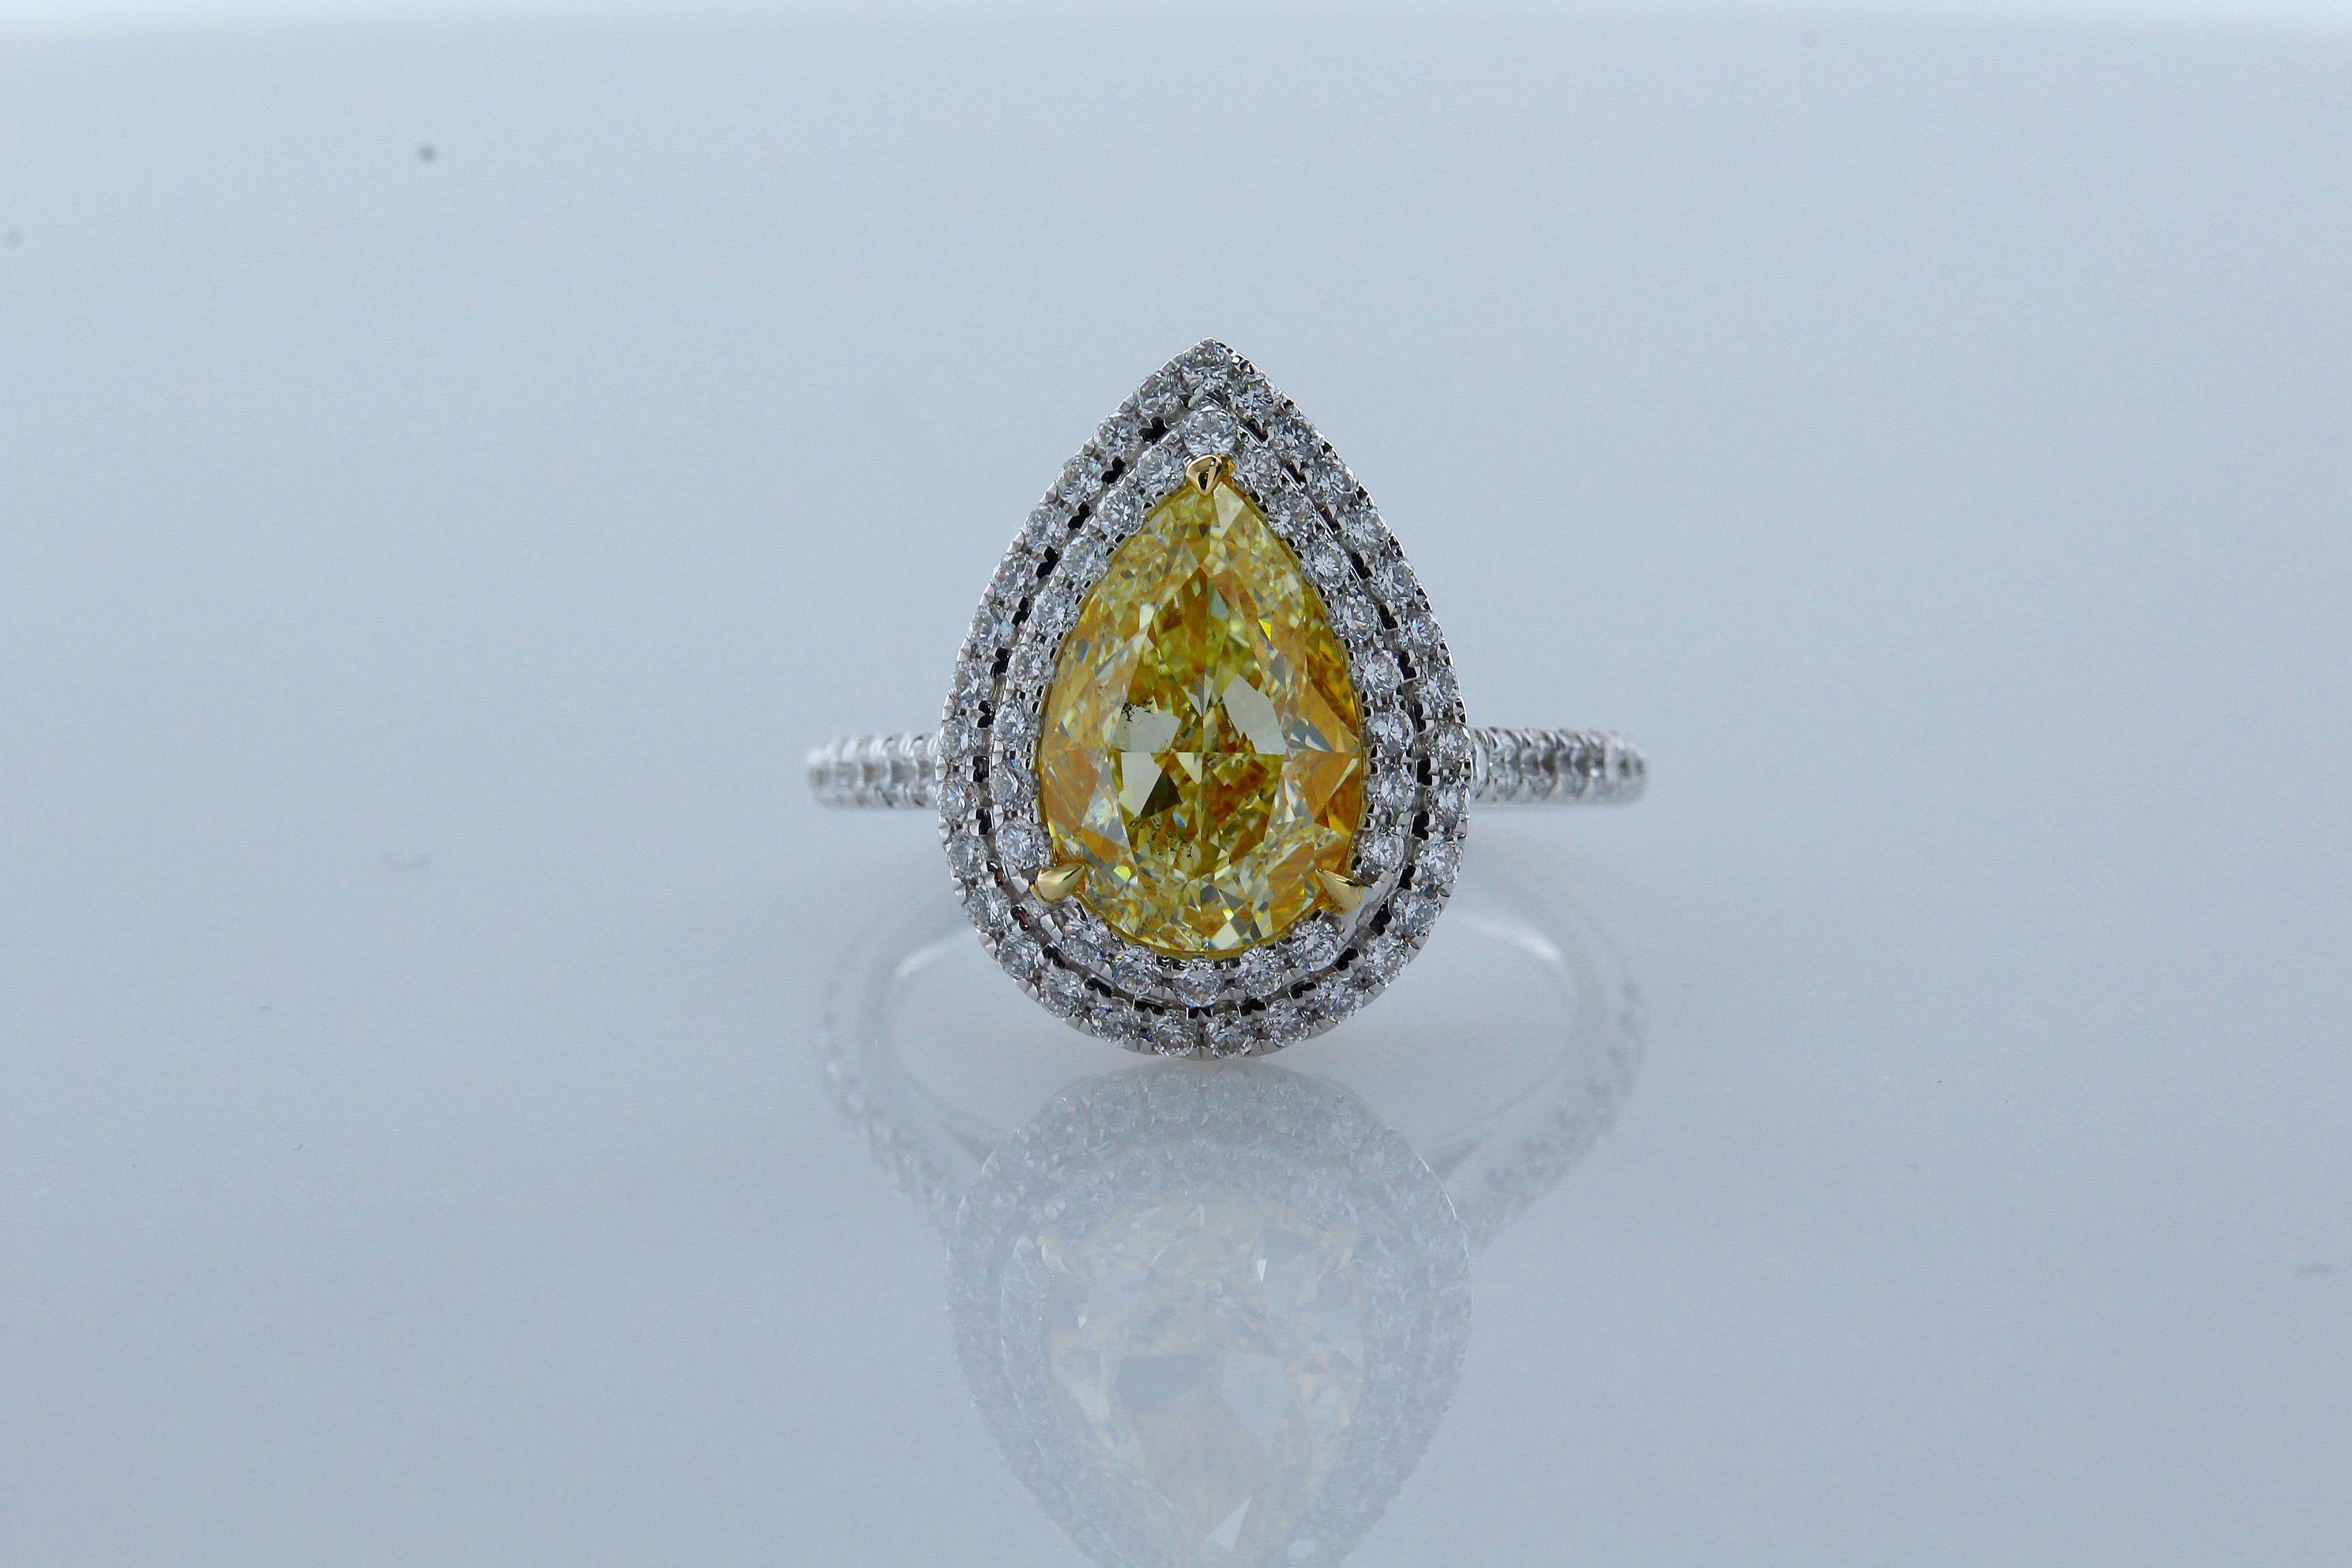 Incredible Deal on  3.02 Carat Pear Shape Natural Fancy Yellow Color SI1 Clarity Diamond 18 Karat White Gold Convertible Ring/Pendant.
11.14x7.43x4.81 millimeter. Total Carat Weight on the ring is 3.71. 

This Ring converts into pendant with classic